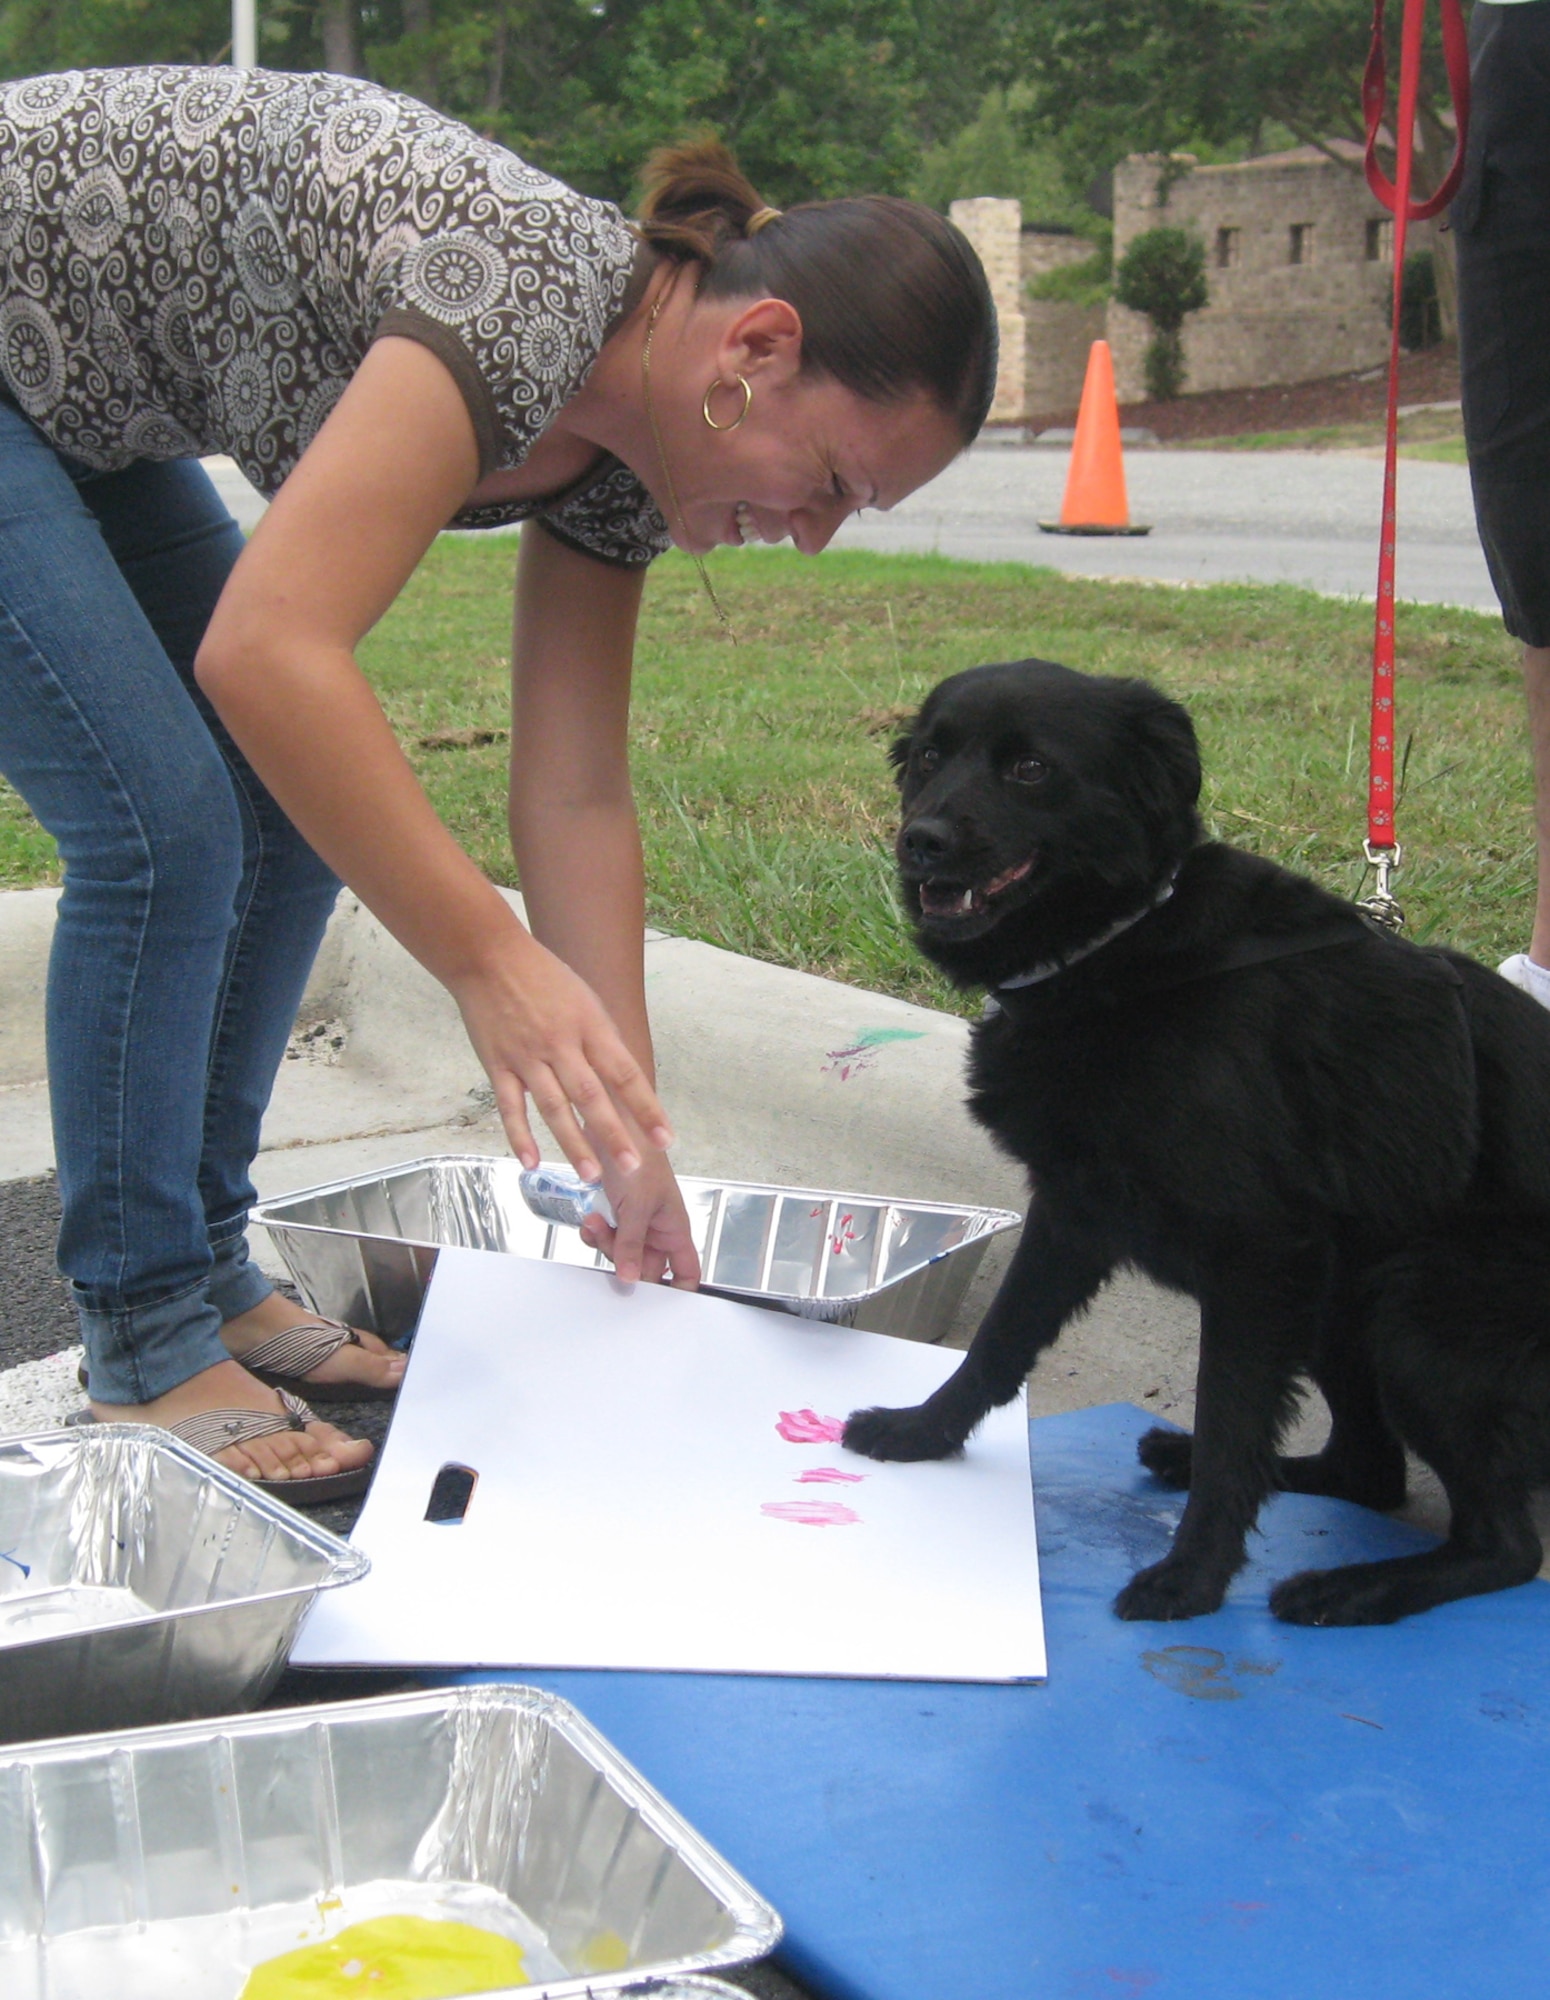 Yecenia Cosme helps her dog, Negrita, with a paw painting at the Pet Fair hosted by the Southern Pines Inn on Seymour Johnson Air Force Base, N.C., Sept. 19, 2009. Mrs. Cosme is the wife of Tech. Sgt. Juan Cosme, 4th Aircraft Maintenance Squadron load crew chief. The fair featured adoption booths from Diamonds in the Ruff and the Wayne County Animal Shelter in Goldsboro, educational information, micro chipping, patriotic pet photos and more.  (U.S. Air Force photo by Tech. Sgt. Tammie Moore)